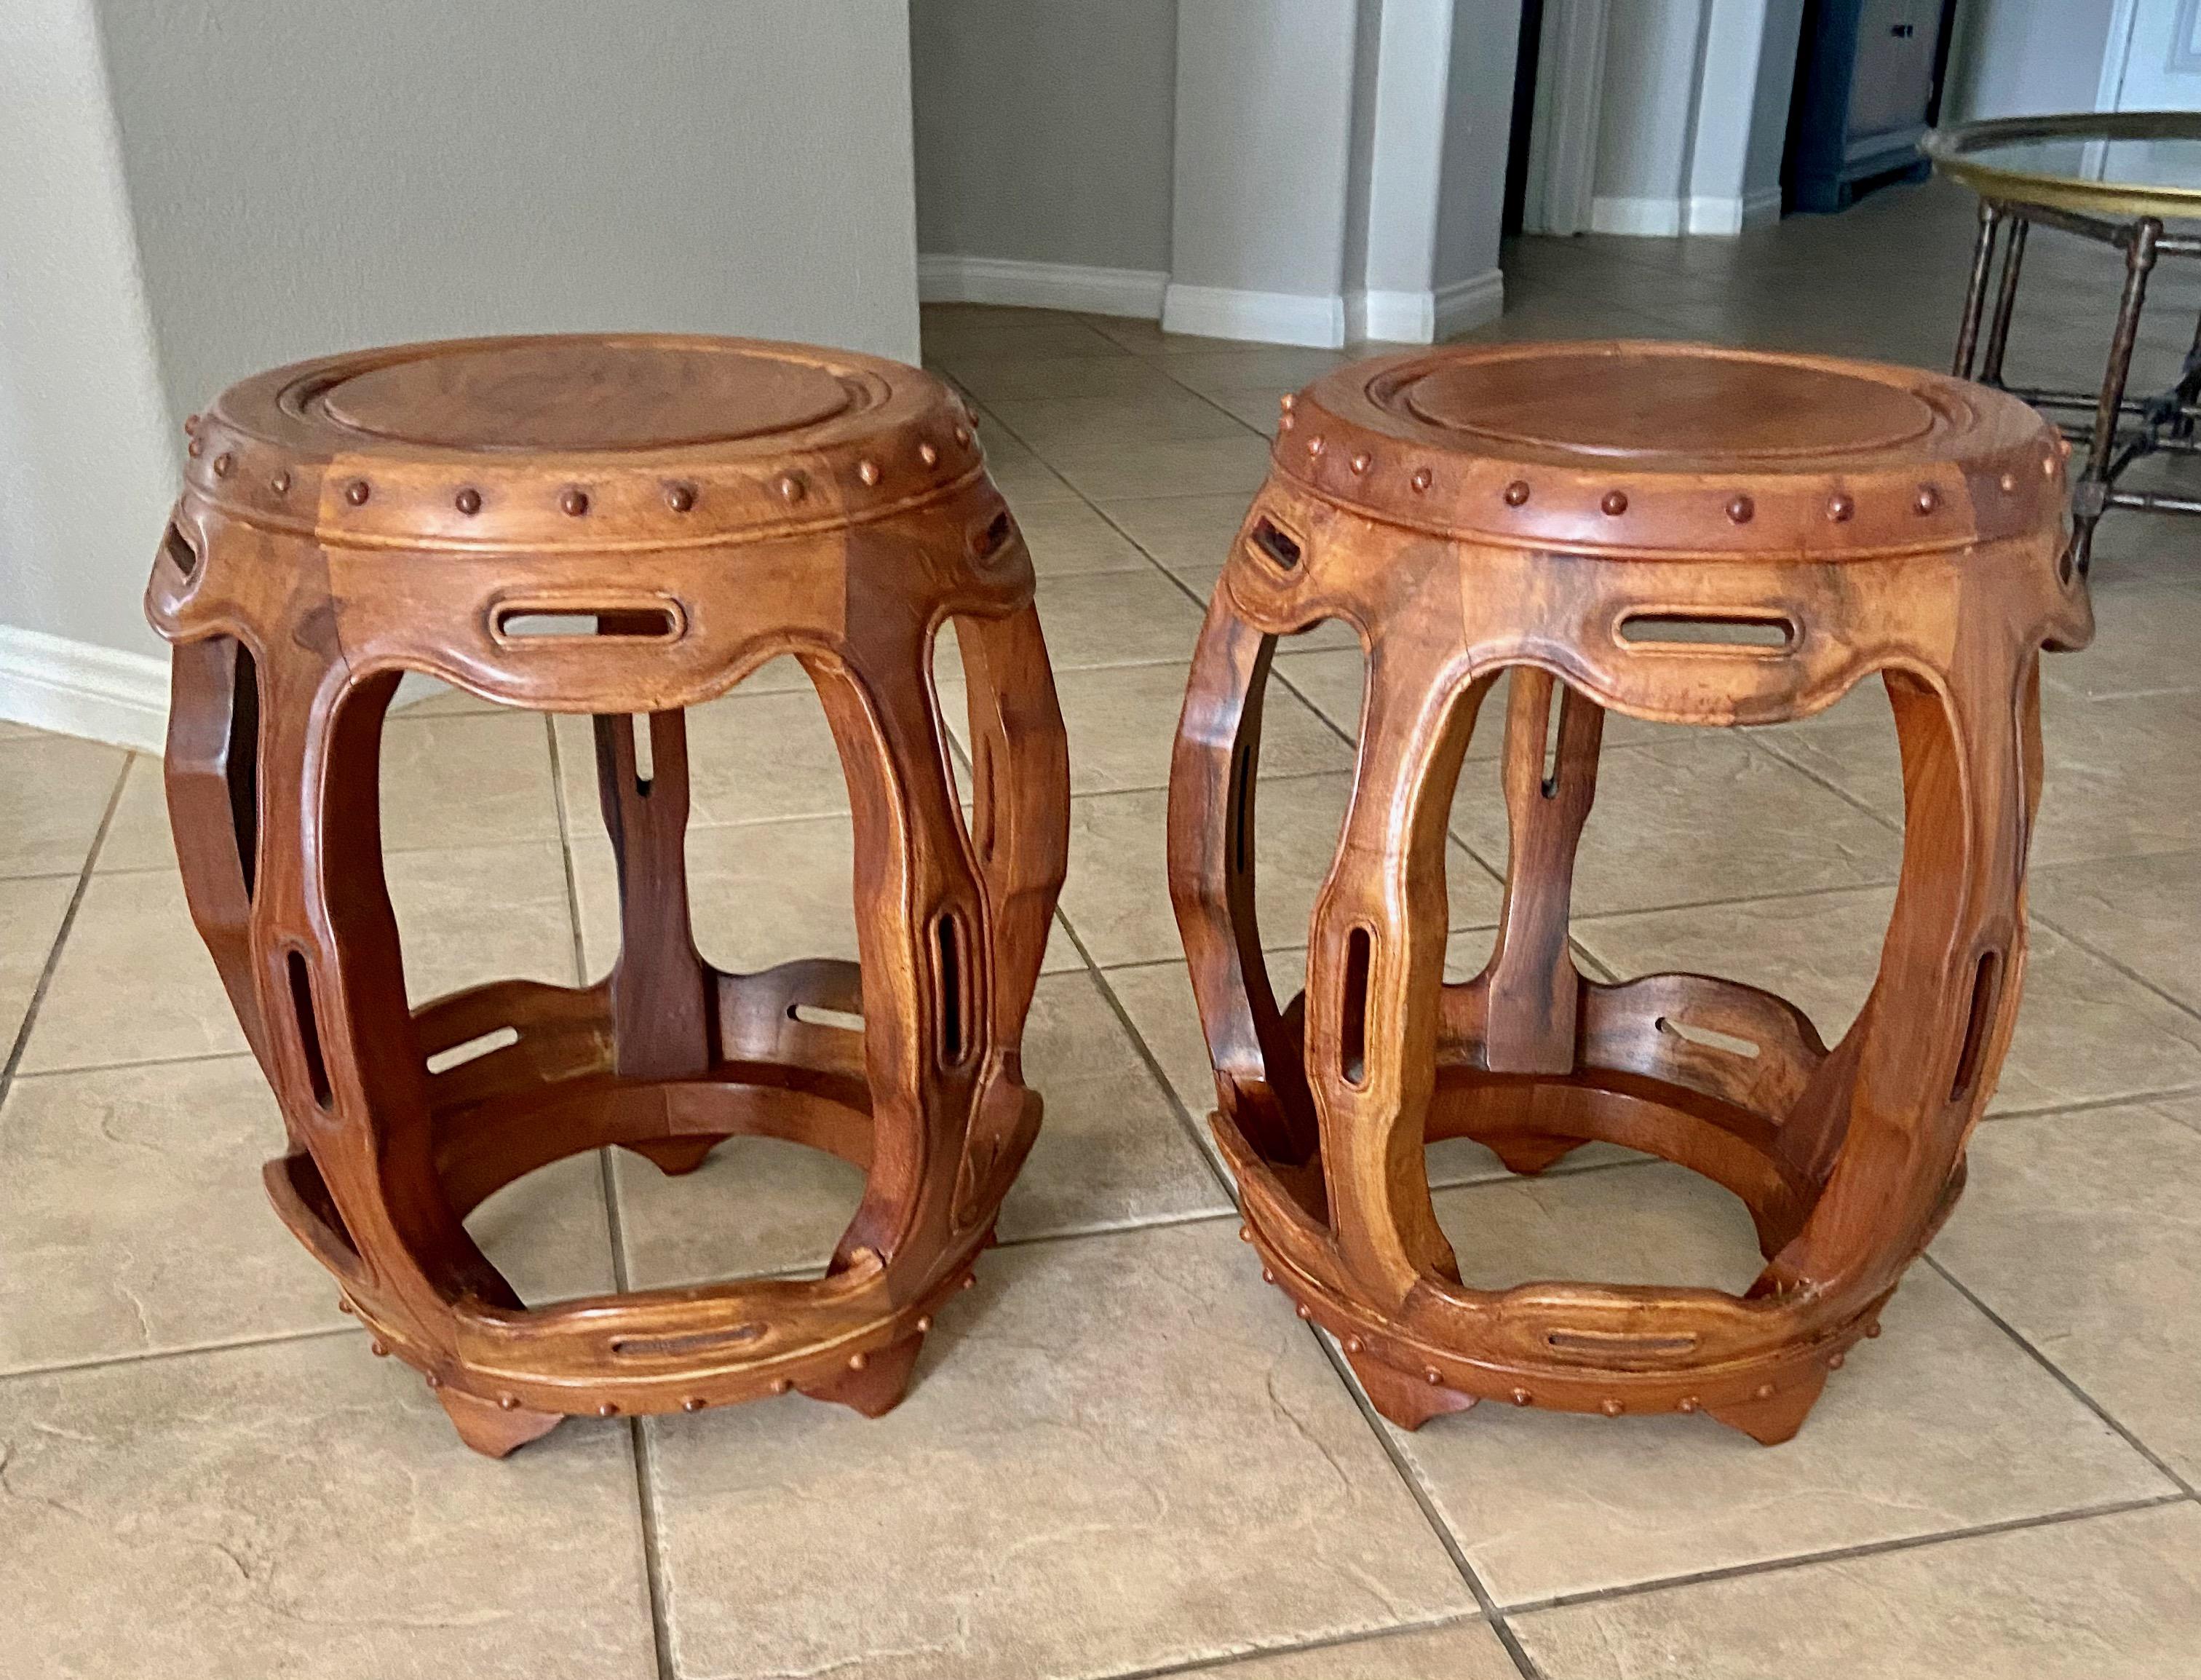 Pair Late Qing Dynasty Chinese Hardwood Garden Seat Stools 4